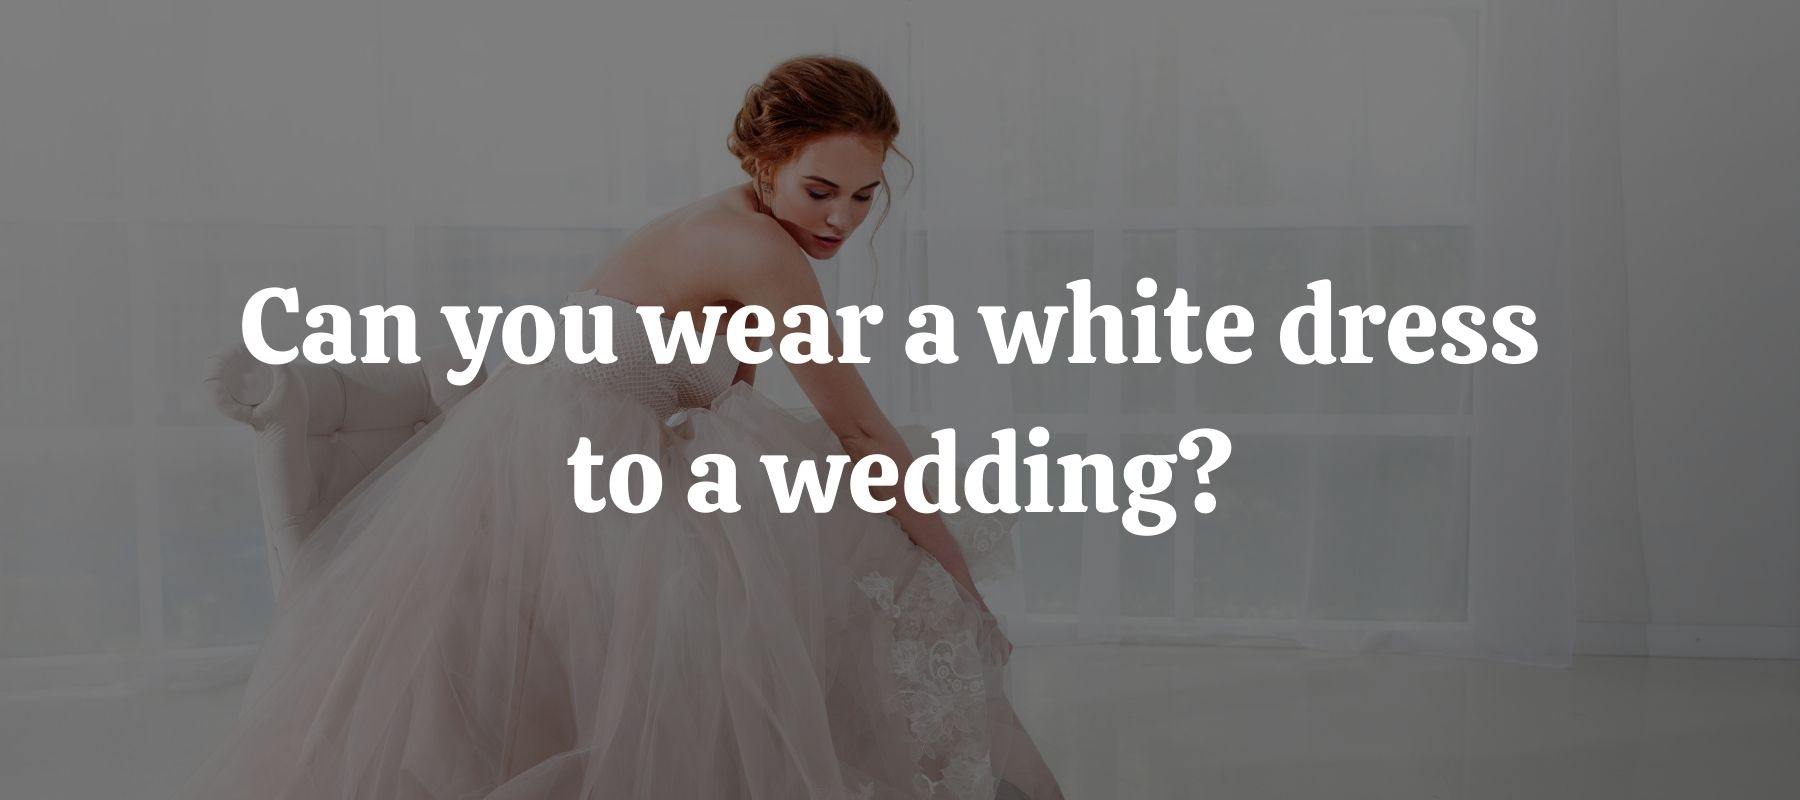 Can you wear a white dress to a wedding